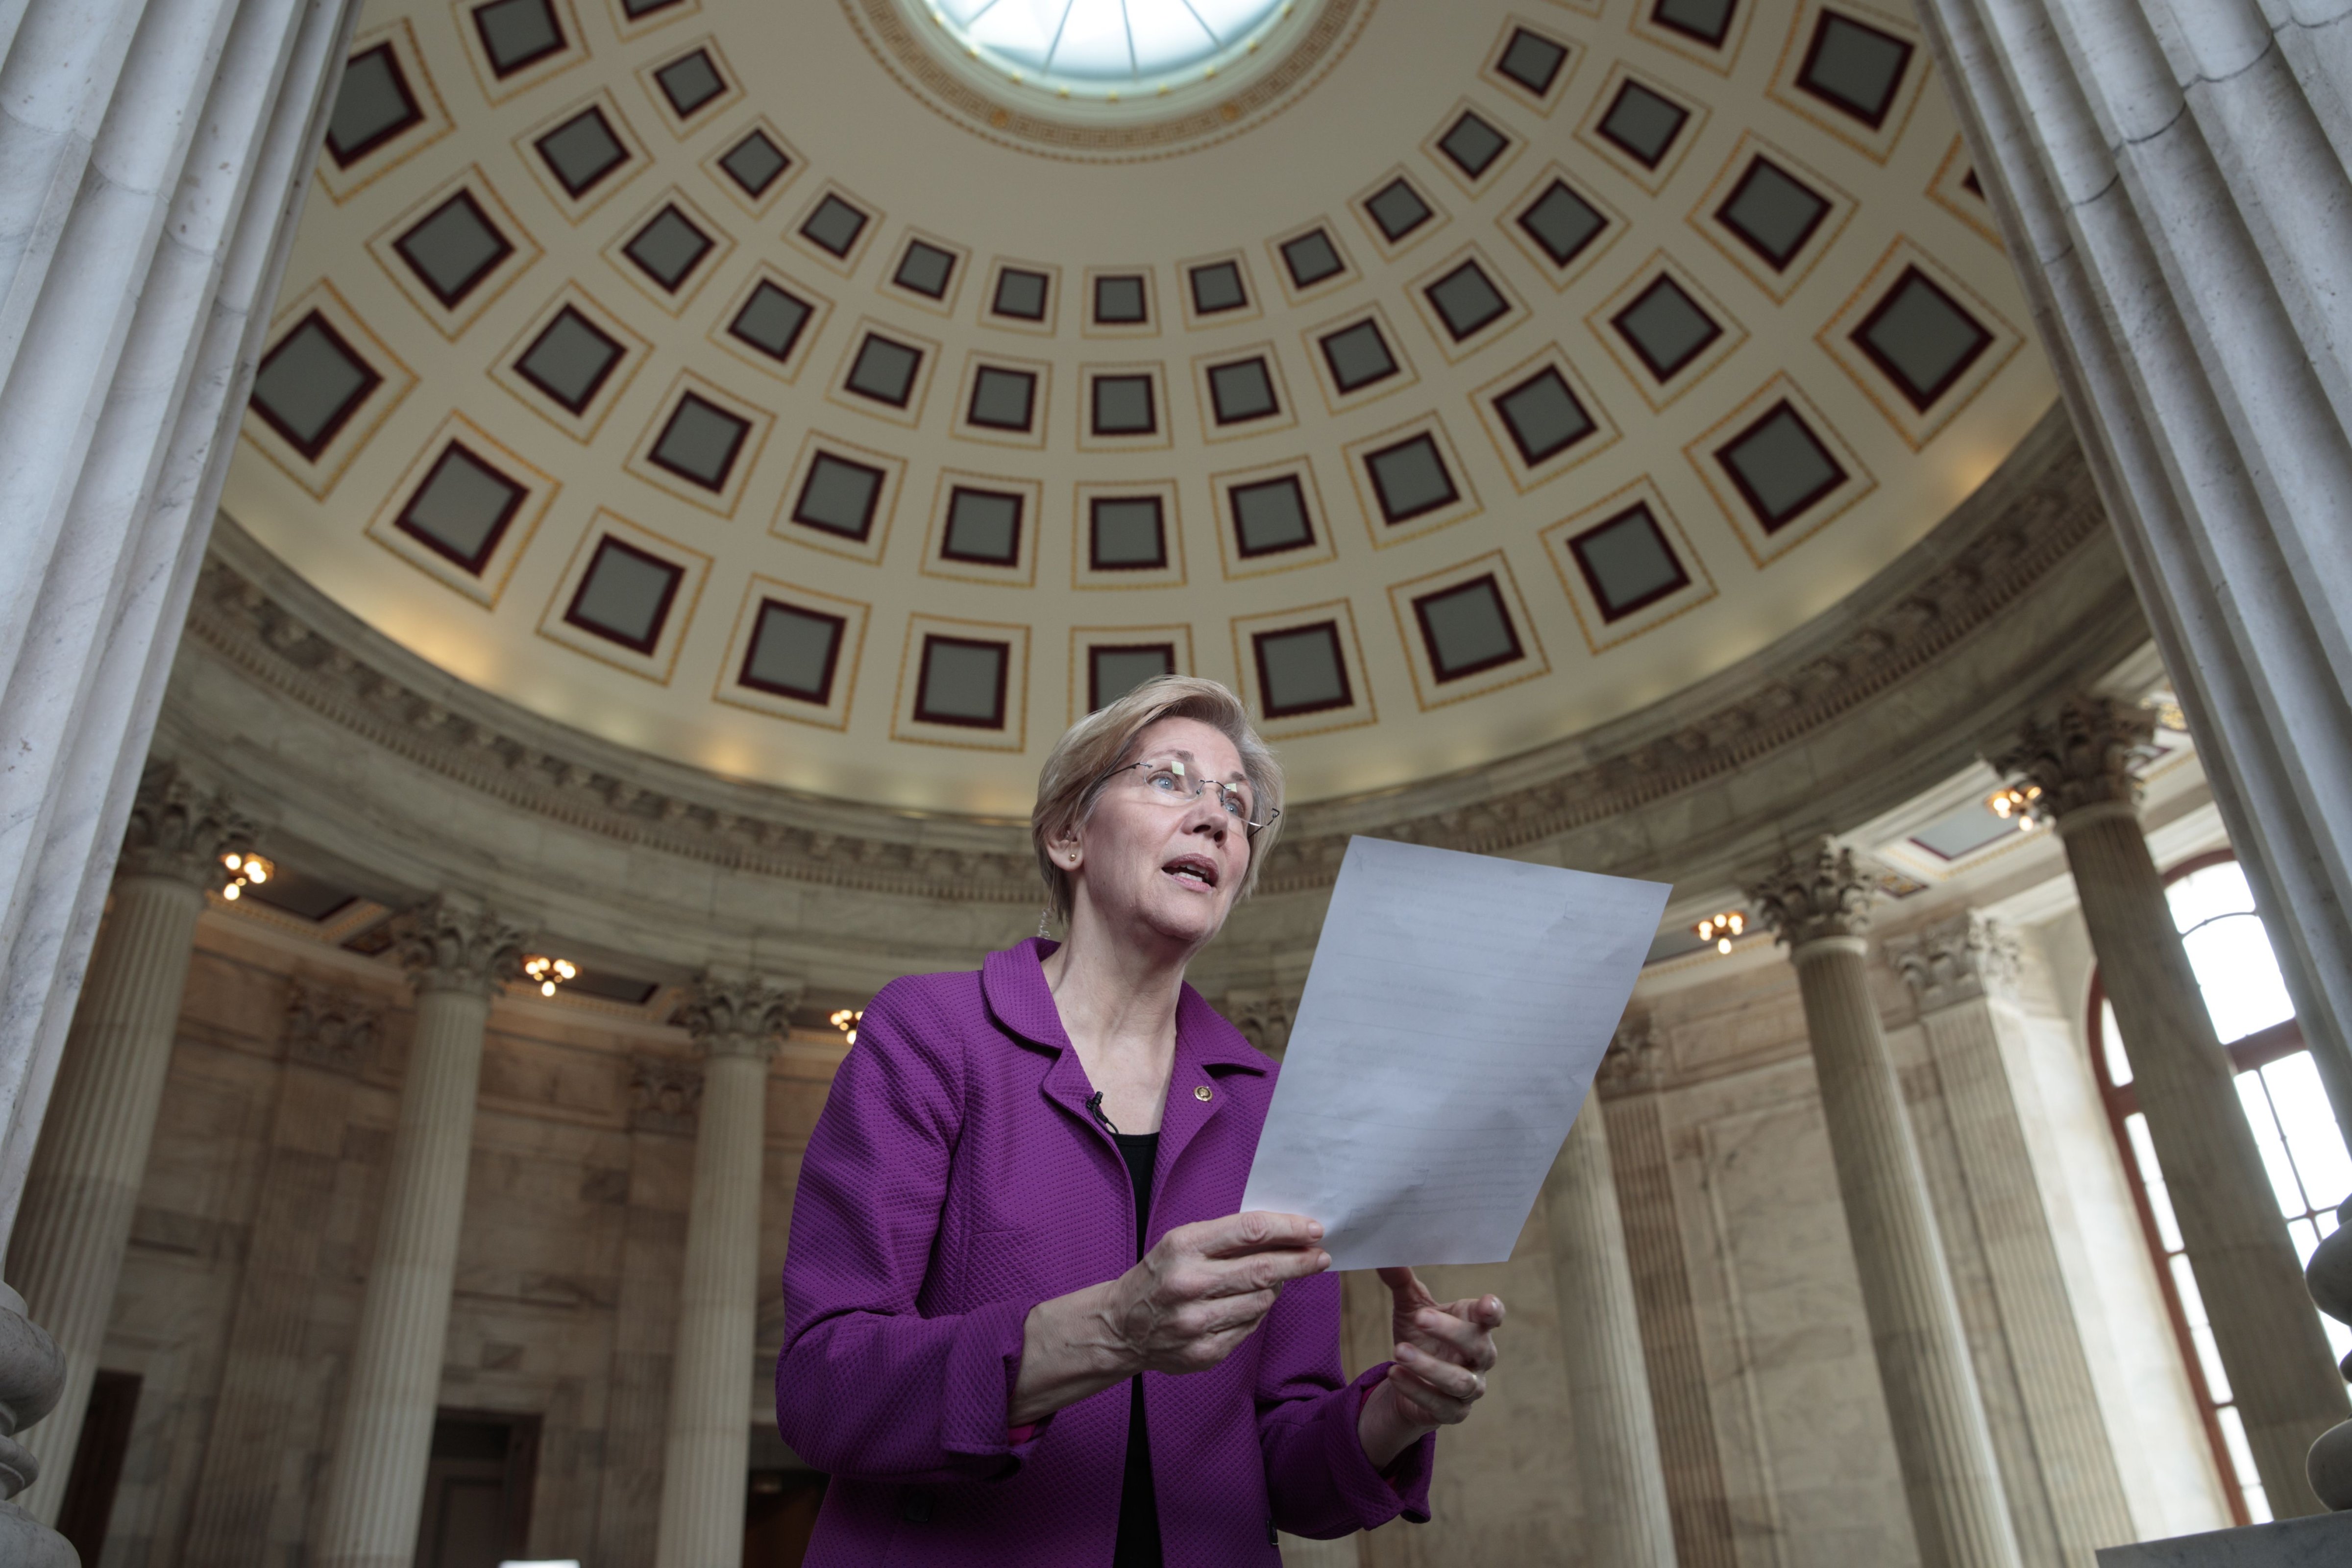 Holding a transcript of her speech in the Senate Chamber, Massachusetts Sen. Elizabeth Warren reacts to being rebuked by Senate leadership and accused of impugning a fellow senator, Attorney General-designate, Alabama Sen. Jeff Sessions, on Capitol Hill in Washington, D.C. on Feb. 8, 2017. (AP—REX/Shutterstock)